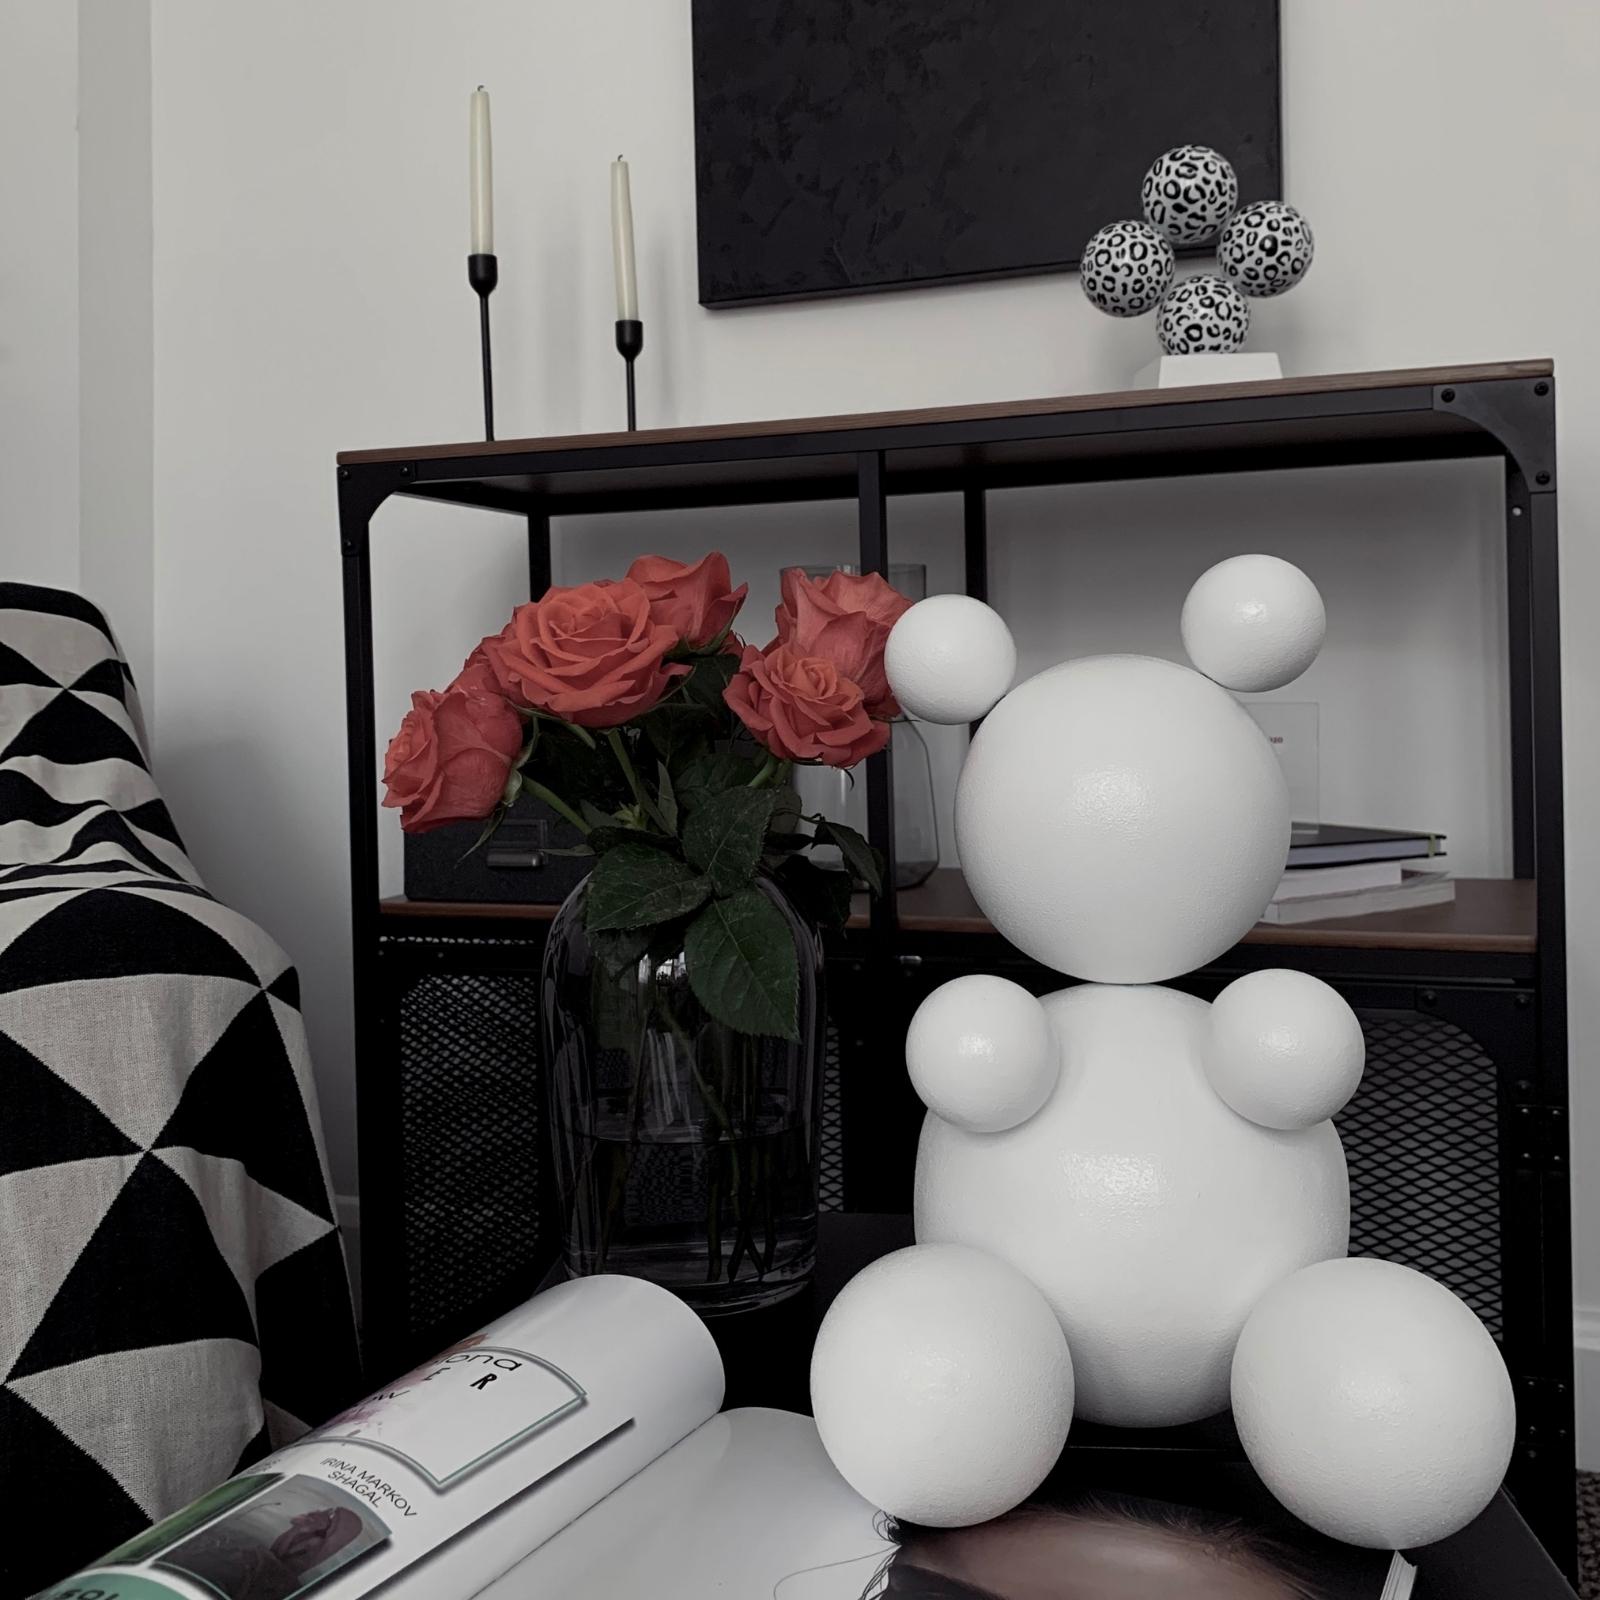 Made in England, 2021.

A simple form builds a complex one. In our approach, we go from the opposite, representing complex things in simple forms. So, our bear consists of only 9 simple steel balls, but this minimalism does not stop making him a